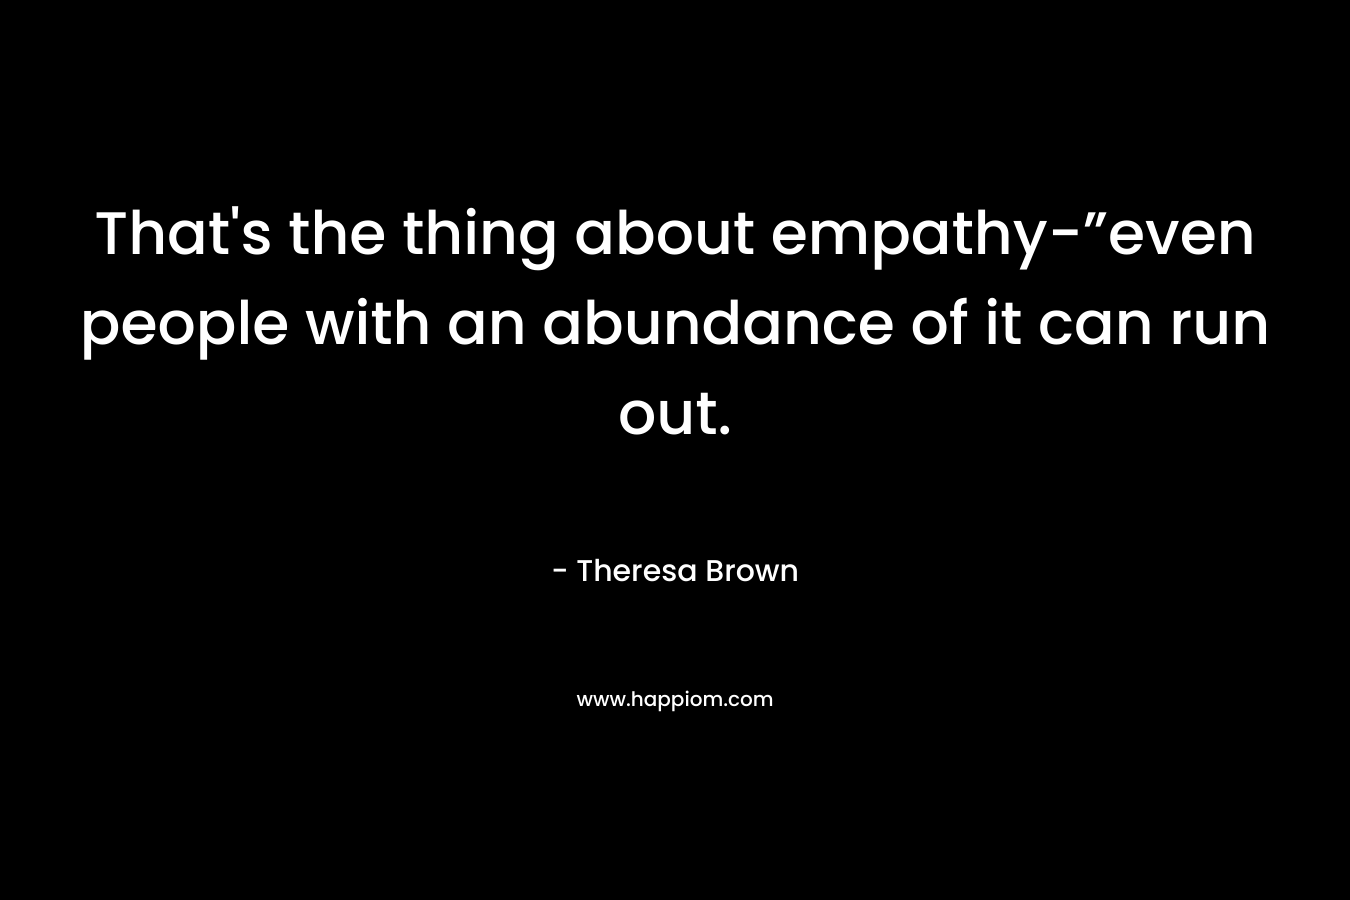 That’s the thing about empathy-”even people with an abundance of it can run out. – Theresa Brown